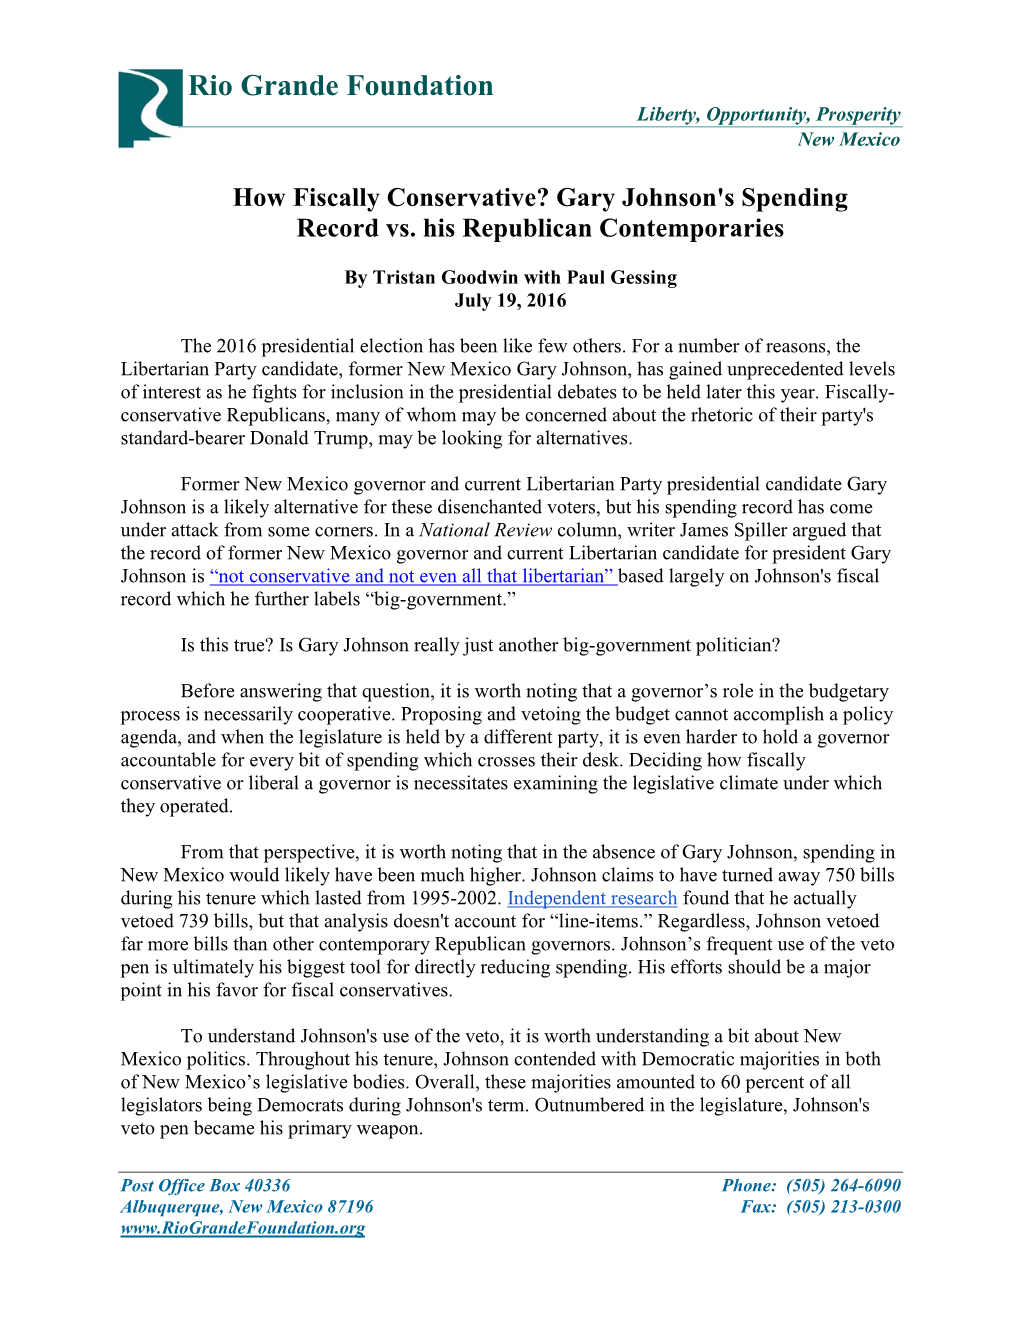 How Fiscally Conservative? Gary Johnson's Spending Record Vs